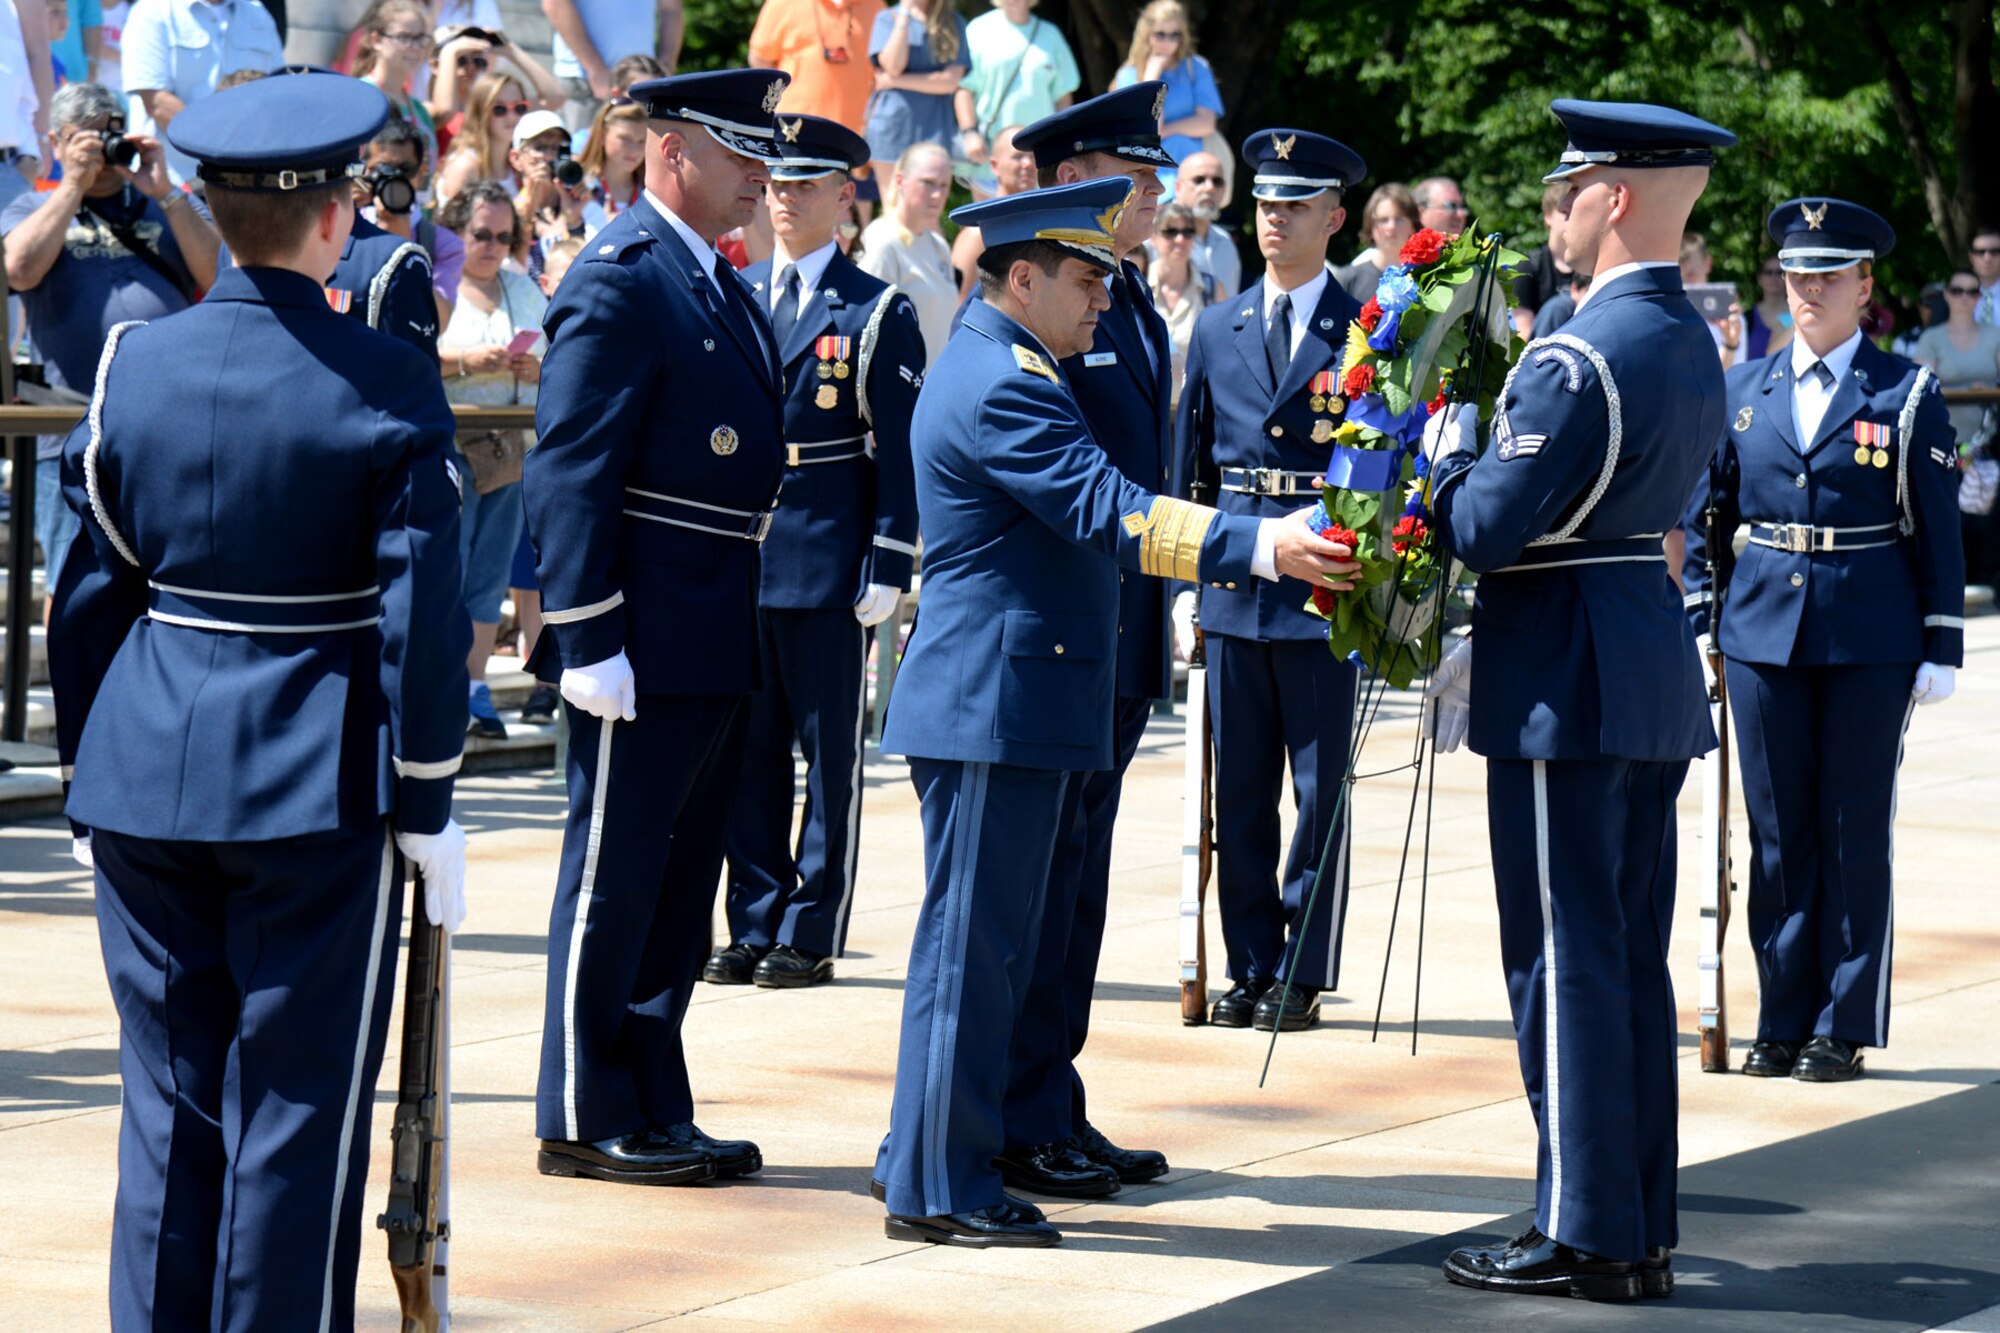 Chief of Air Staff of the Romanian Air Force Maj. Gen. Laurian Anastasof
places a wreath at the Tomb of the Unknown Soldier at Arlington National
Cemetery in Arlington, Virginia, May 24, 2016.  Distinguished visitors
commonly pay formal respects to the sacrifice of America's veterans in
foreign wars by placing a wreath before the Tomb. (U.S. Air Force Photo/Tech. Sgt. Matt Davis)

